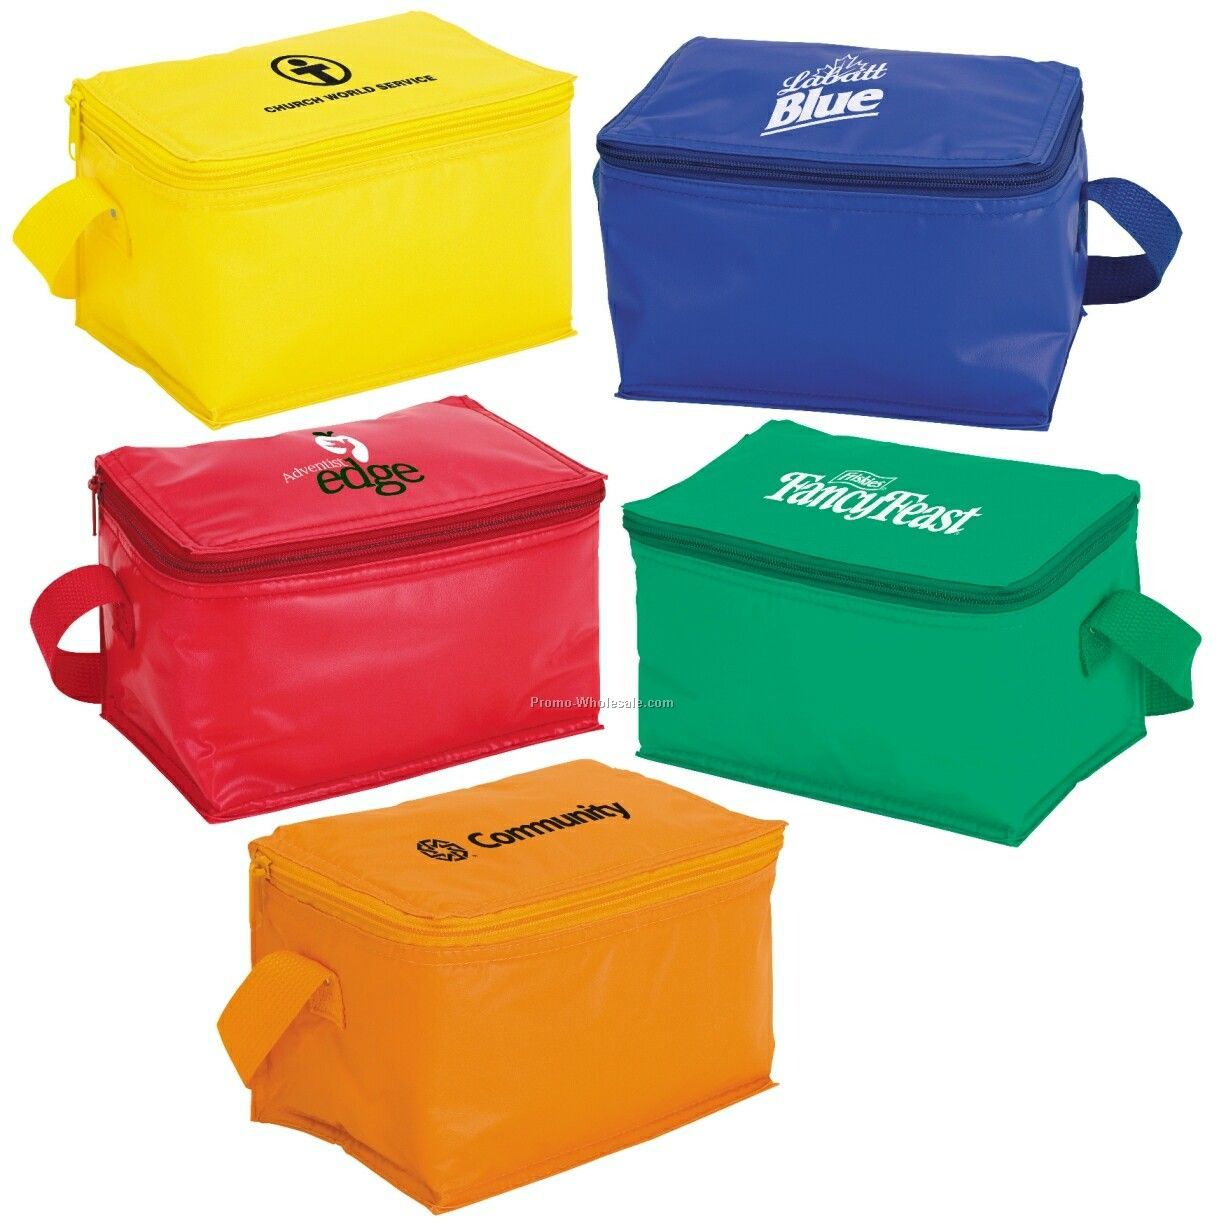 Giftcor Yellow Econo 6-can Cooler 5"x8"x5"